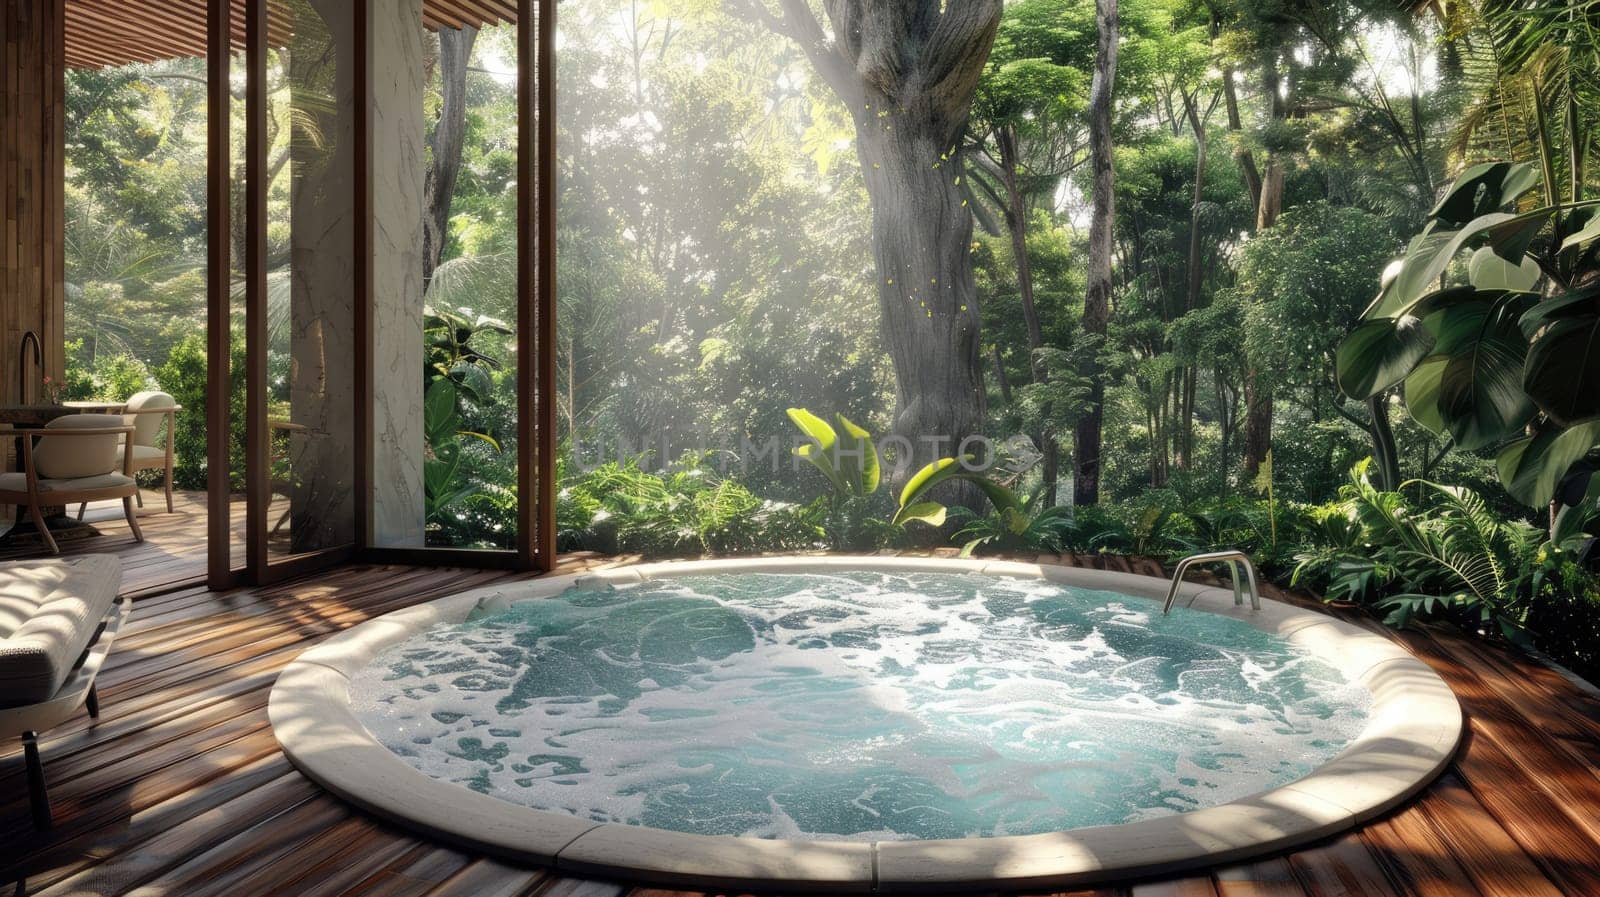 Outdoor jacuzzi pool with fresh blue water for massage and spa AI